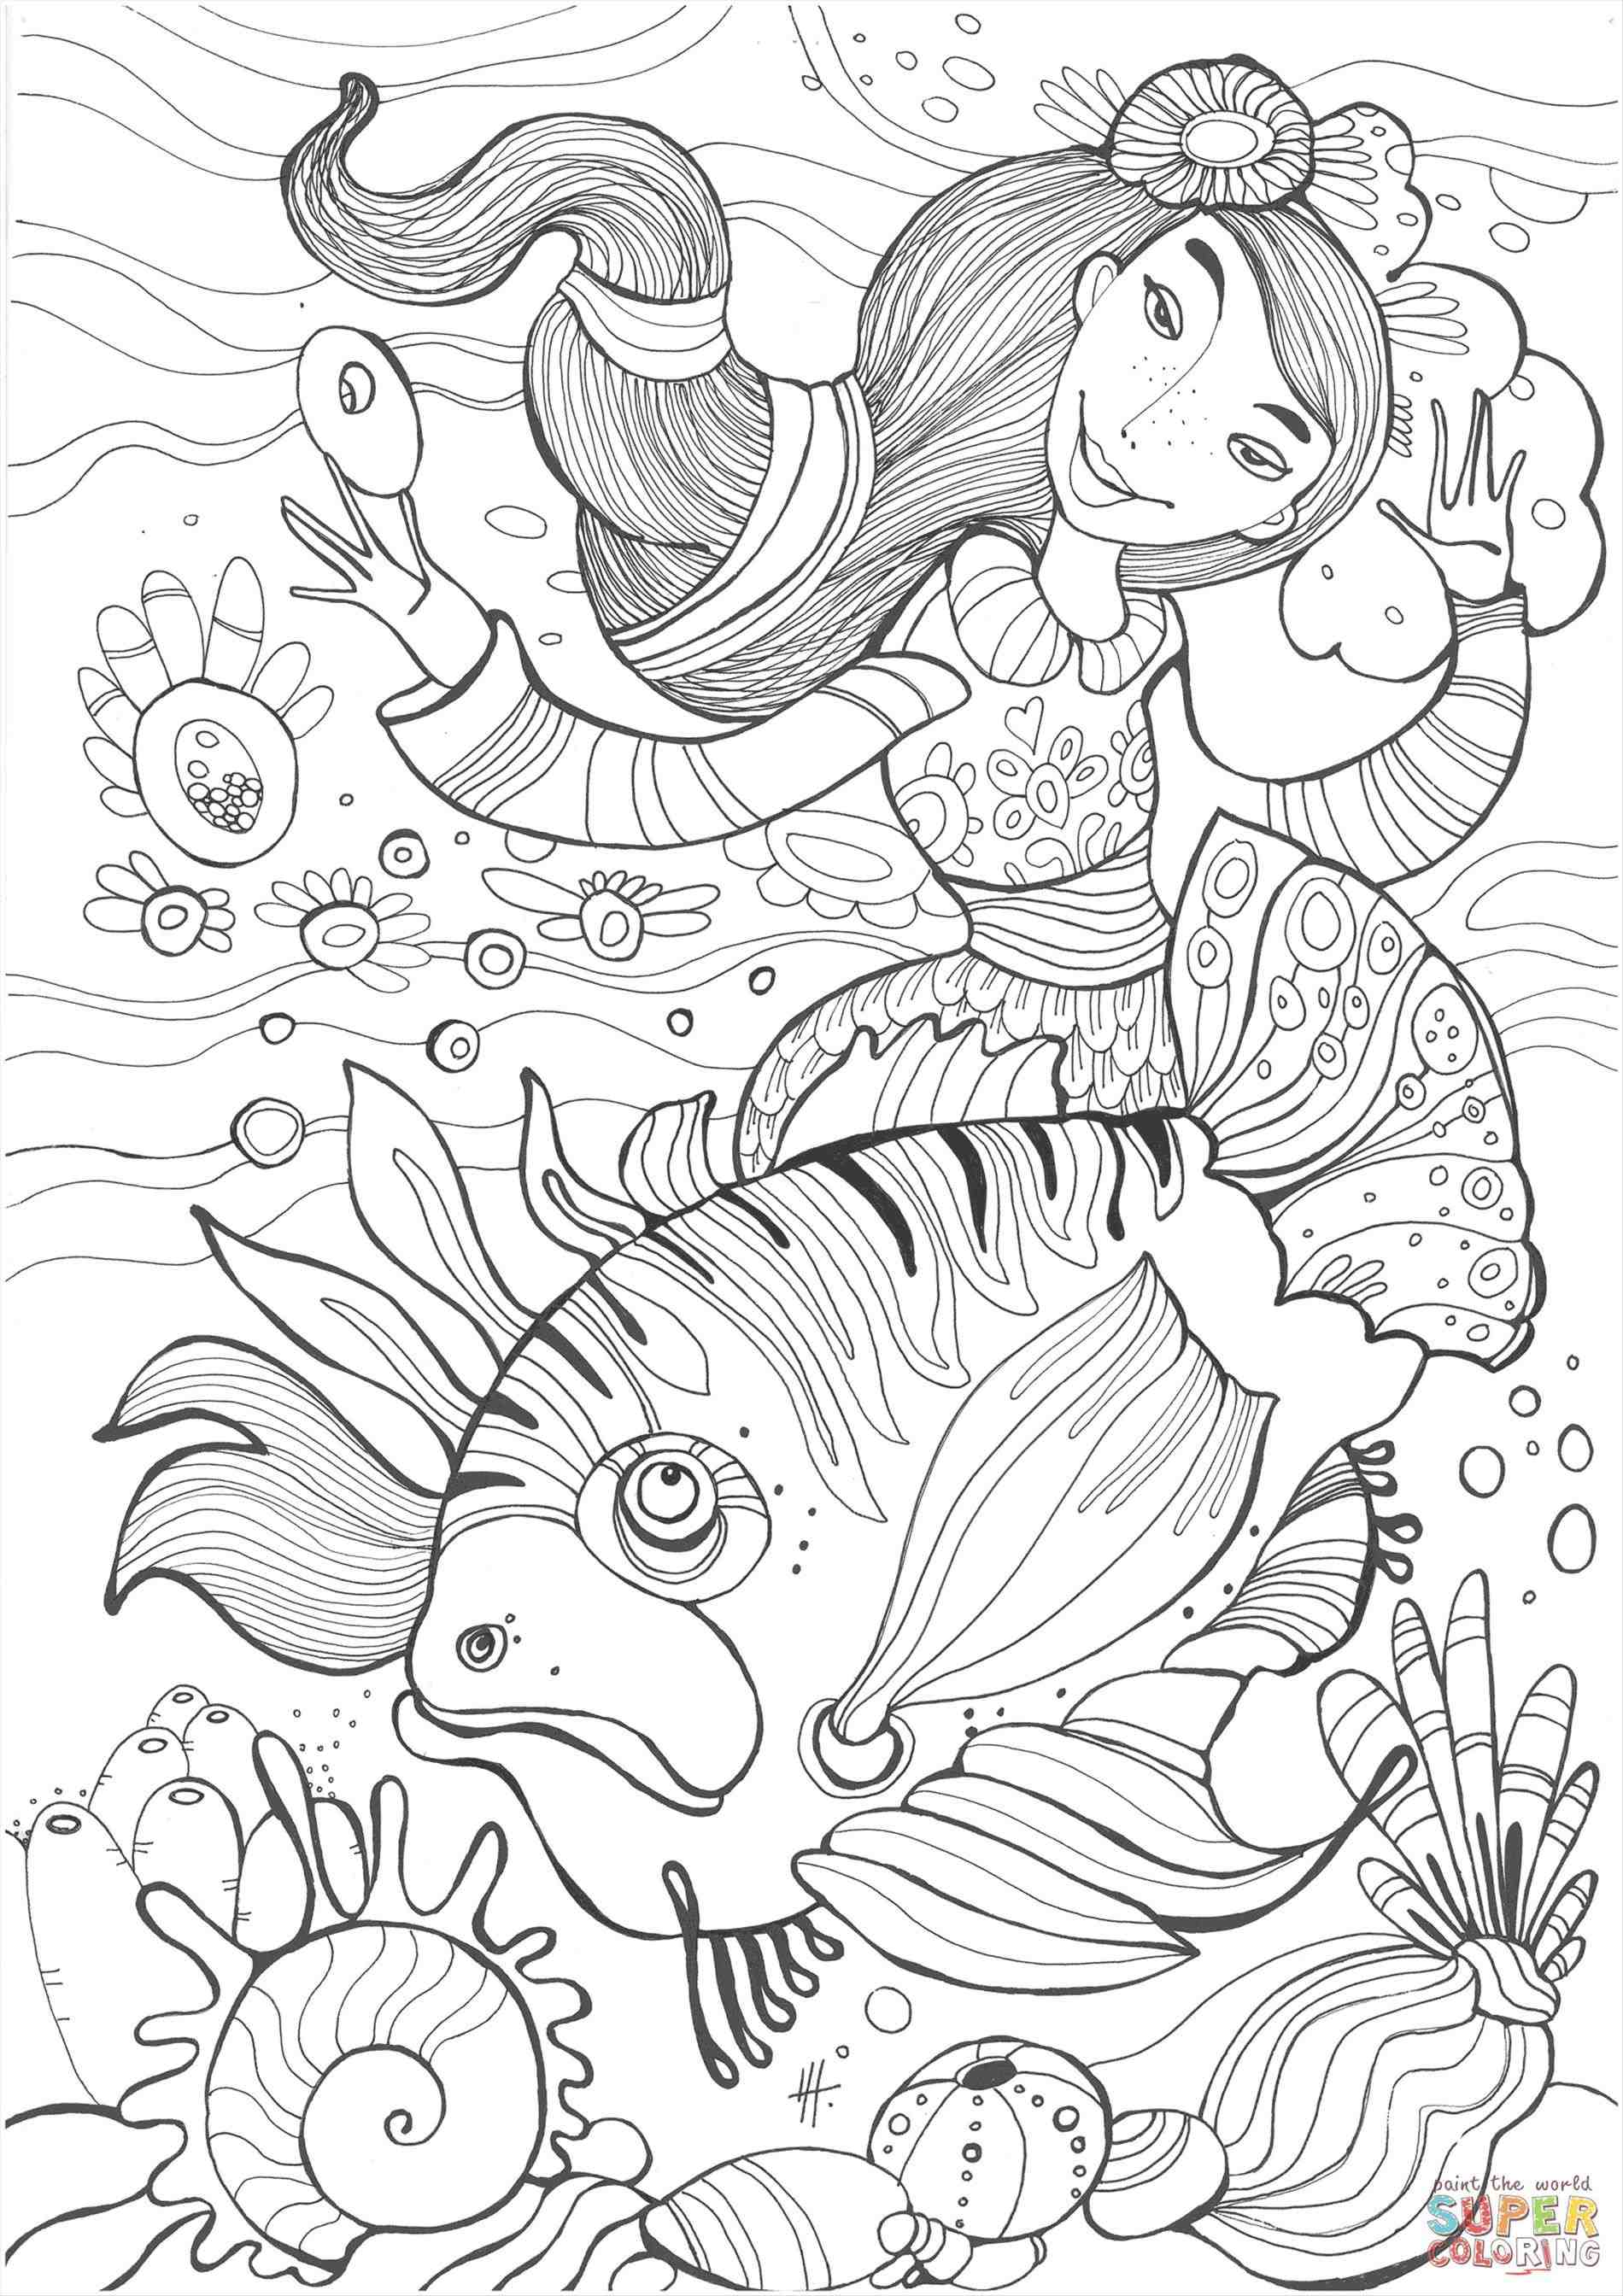 909 Unicorn Detailed Mermaid Coloring Pages with disney character